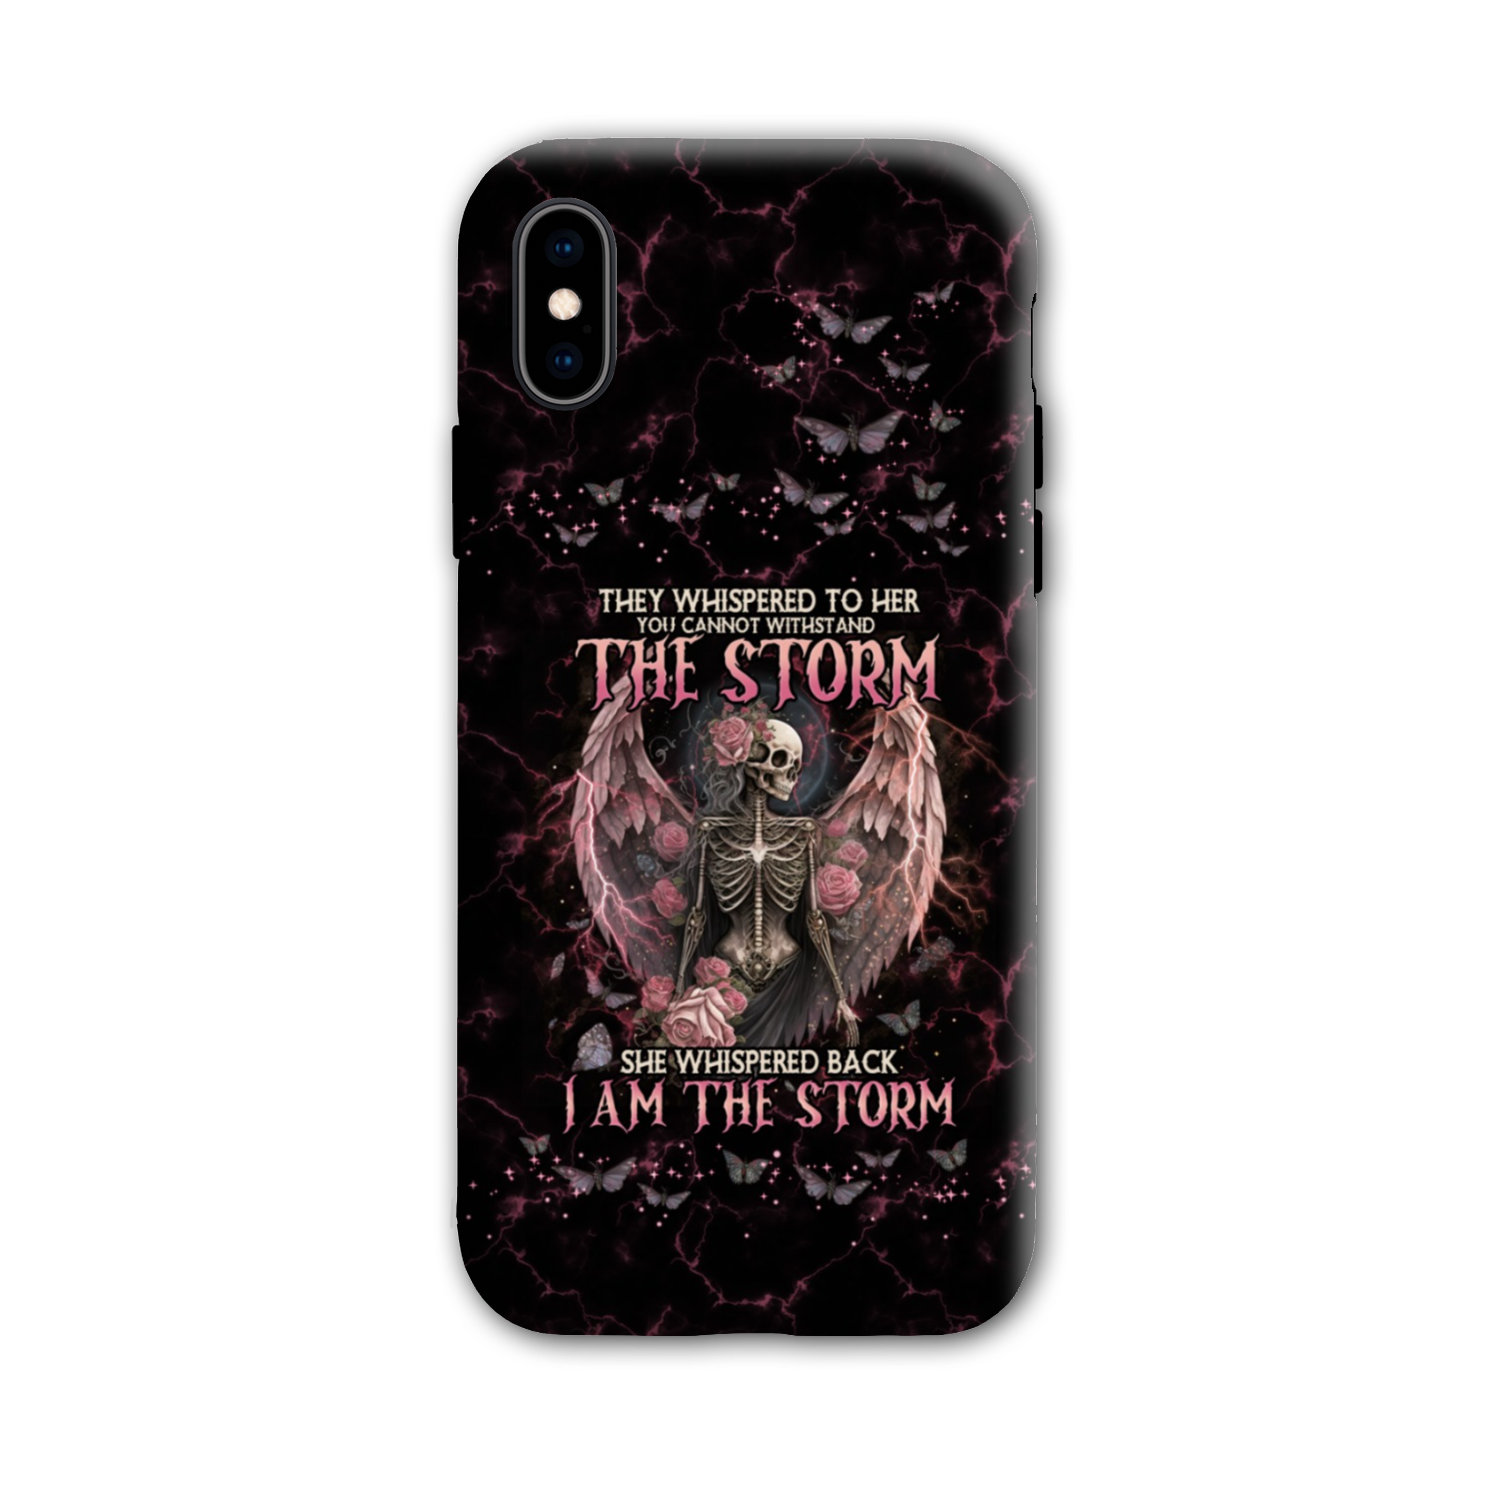 I AM THE STORM SKELETON ROSES WINGS PHONE CASE - TLNO0602233